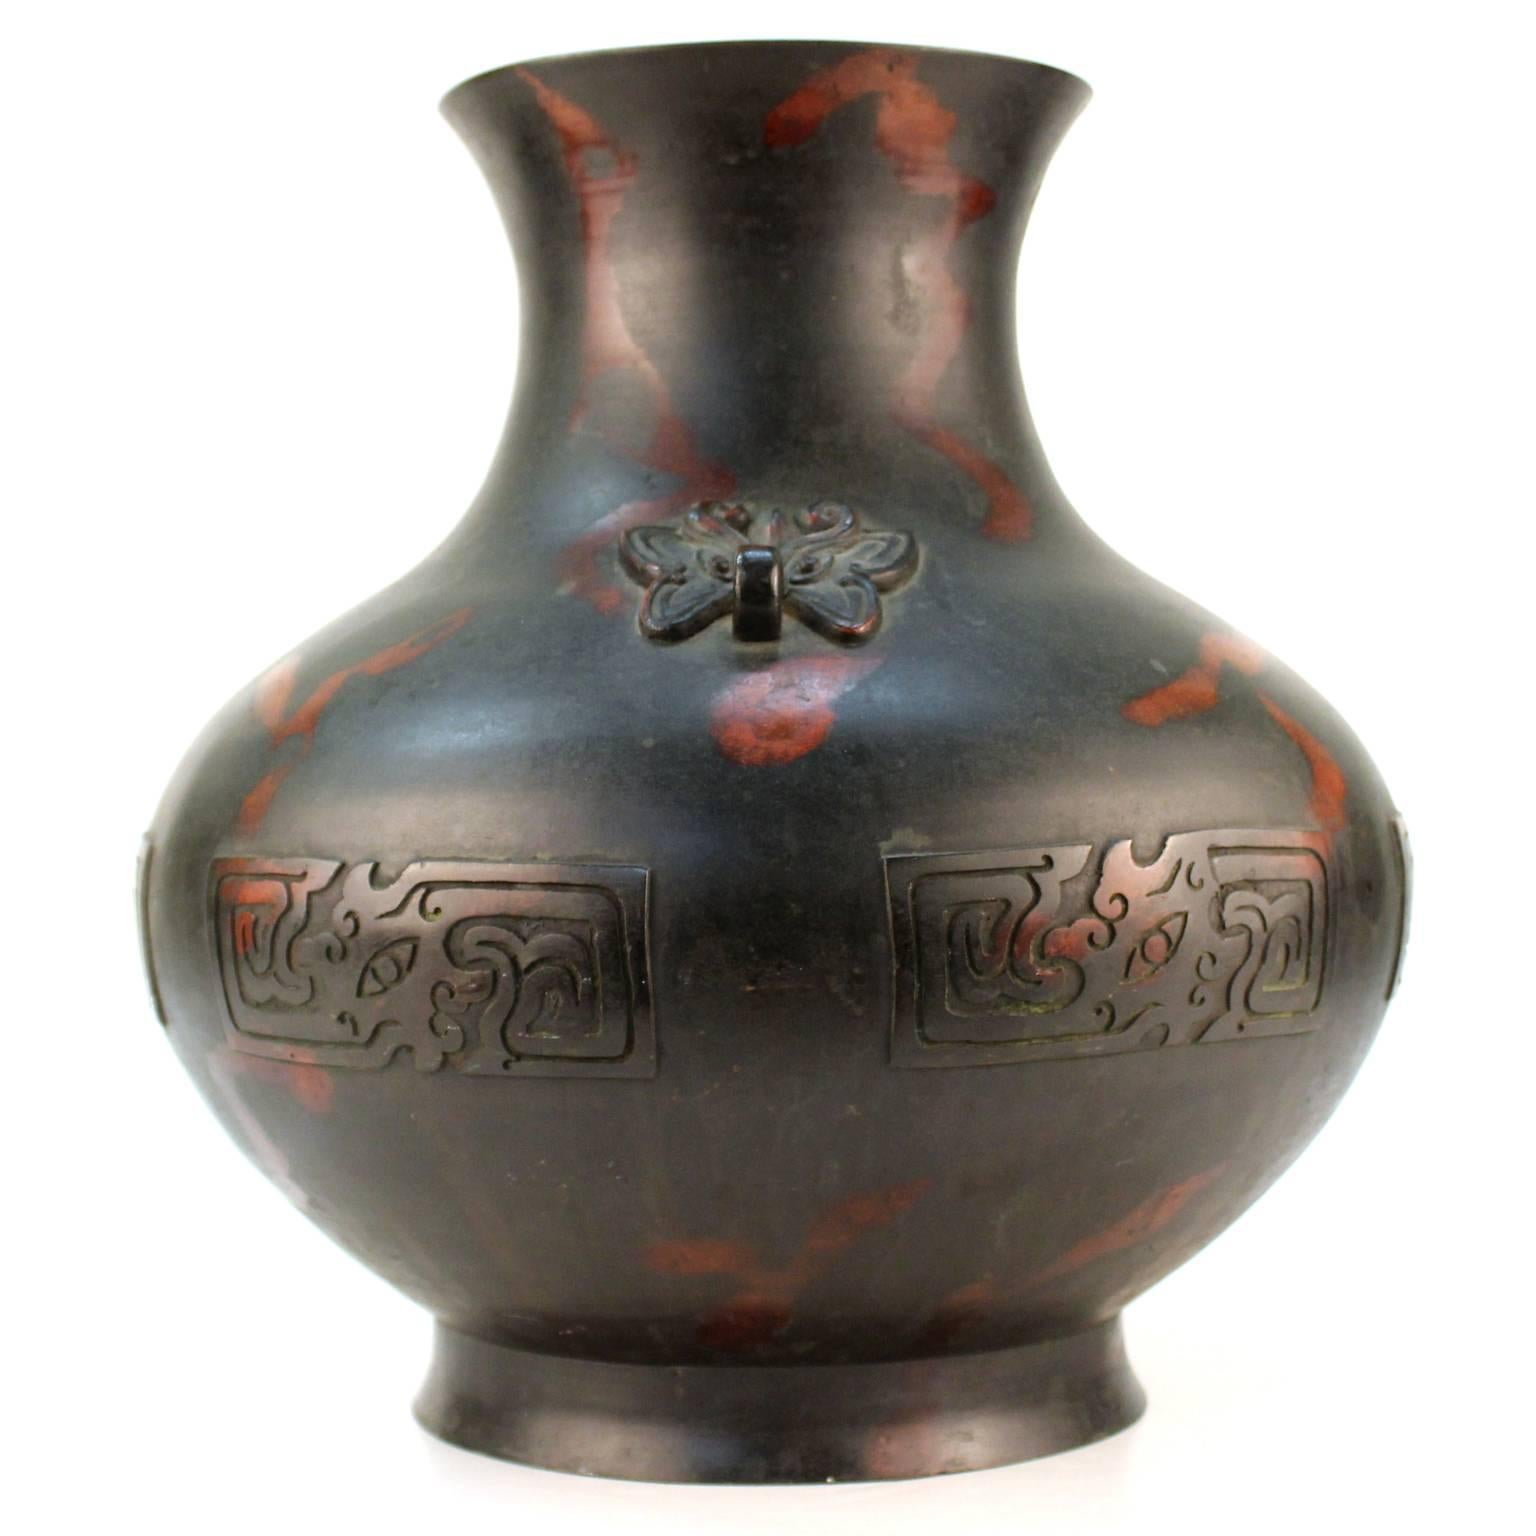 A monumental Japanese Taisho period (1912-1926) red and black patinated vessel in heavy bronze casting. The piece is in good vintage condition with one minor dent on the lower side. Unsigned.